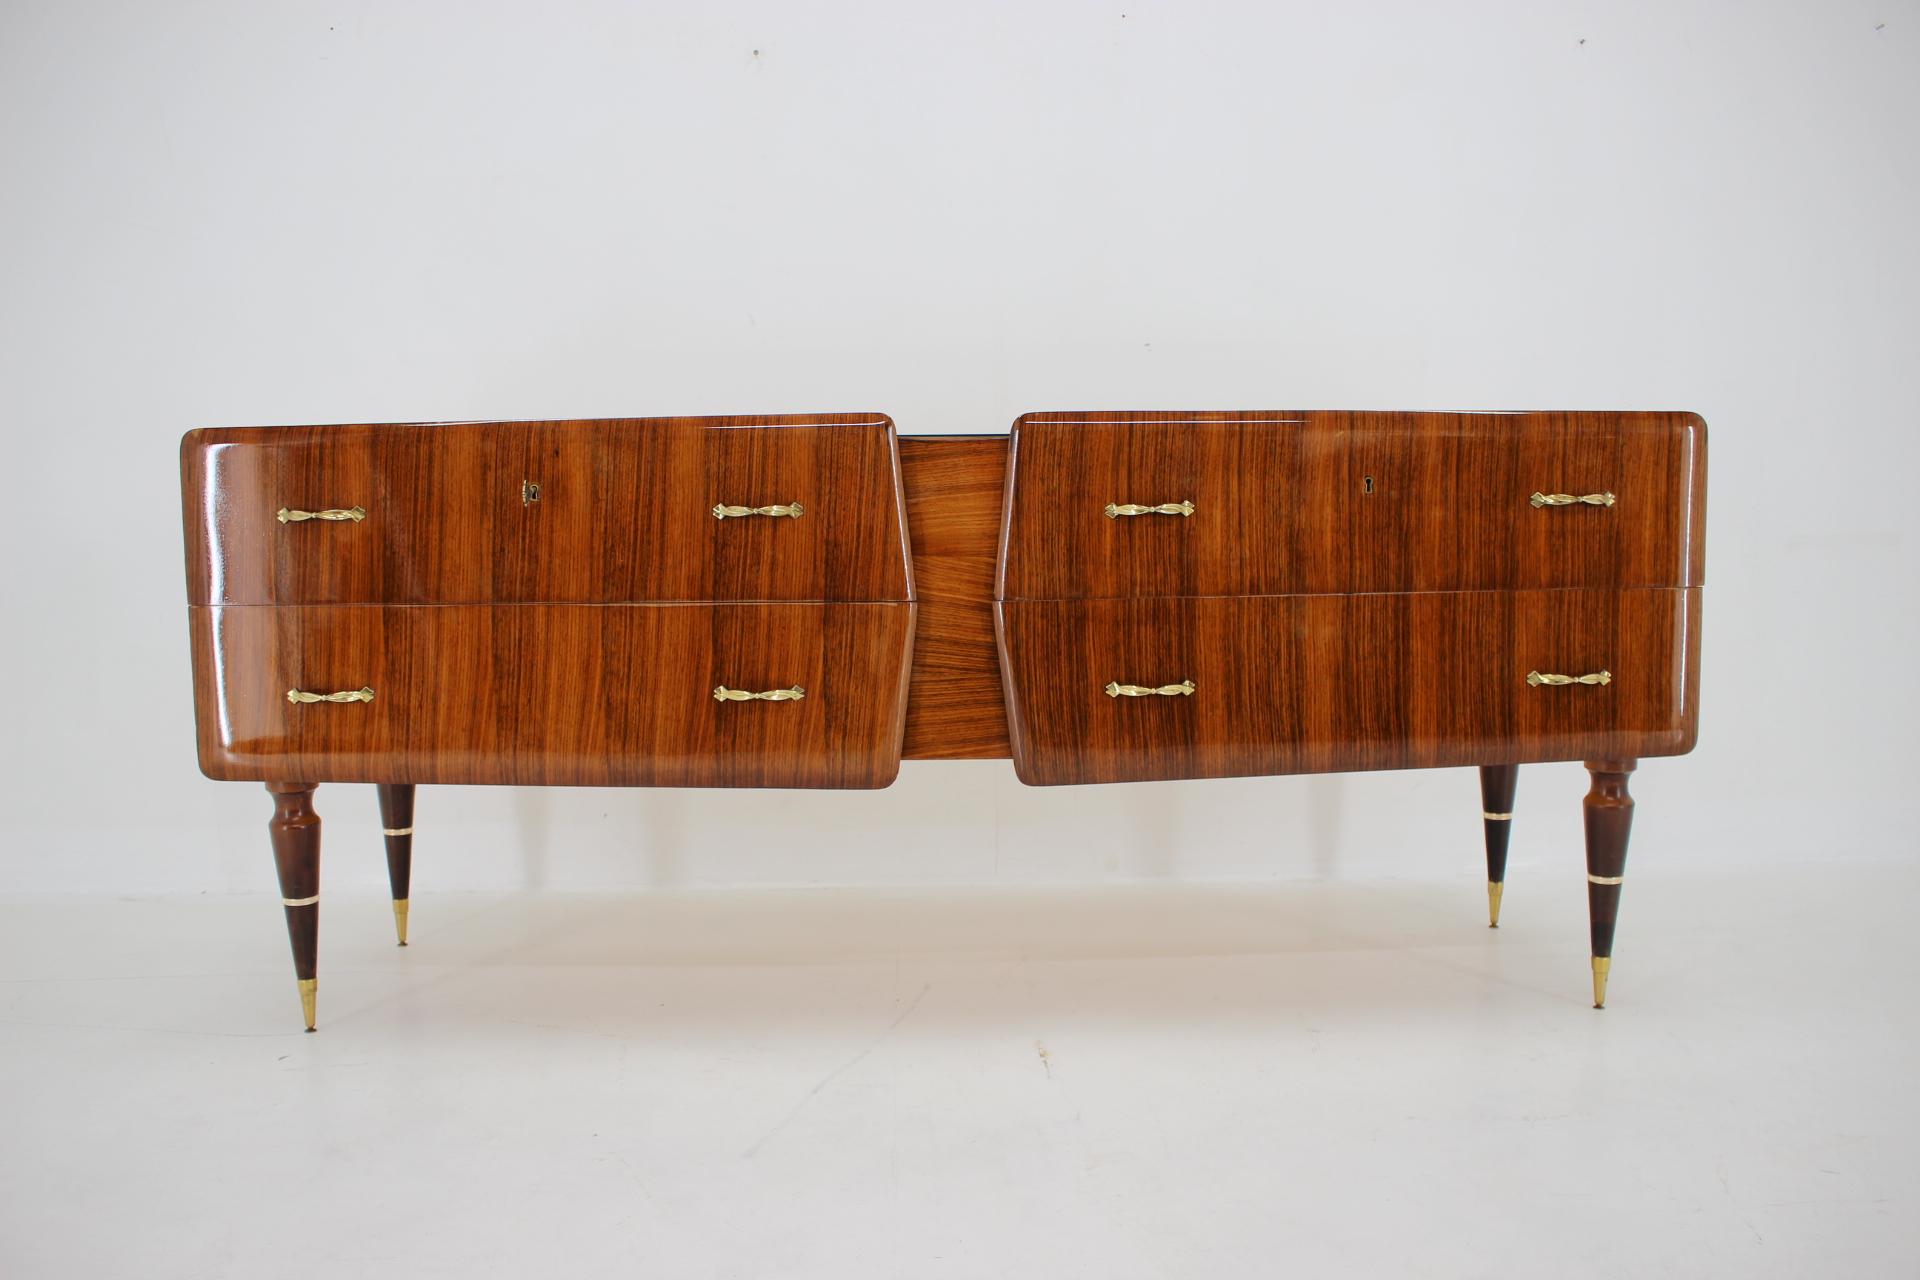 1960s Set of Sculptural Wooden Bedside Tables and Sideboard, Italy For Sale 12